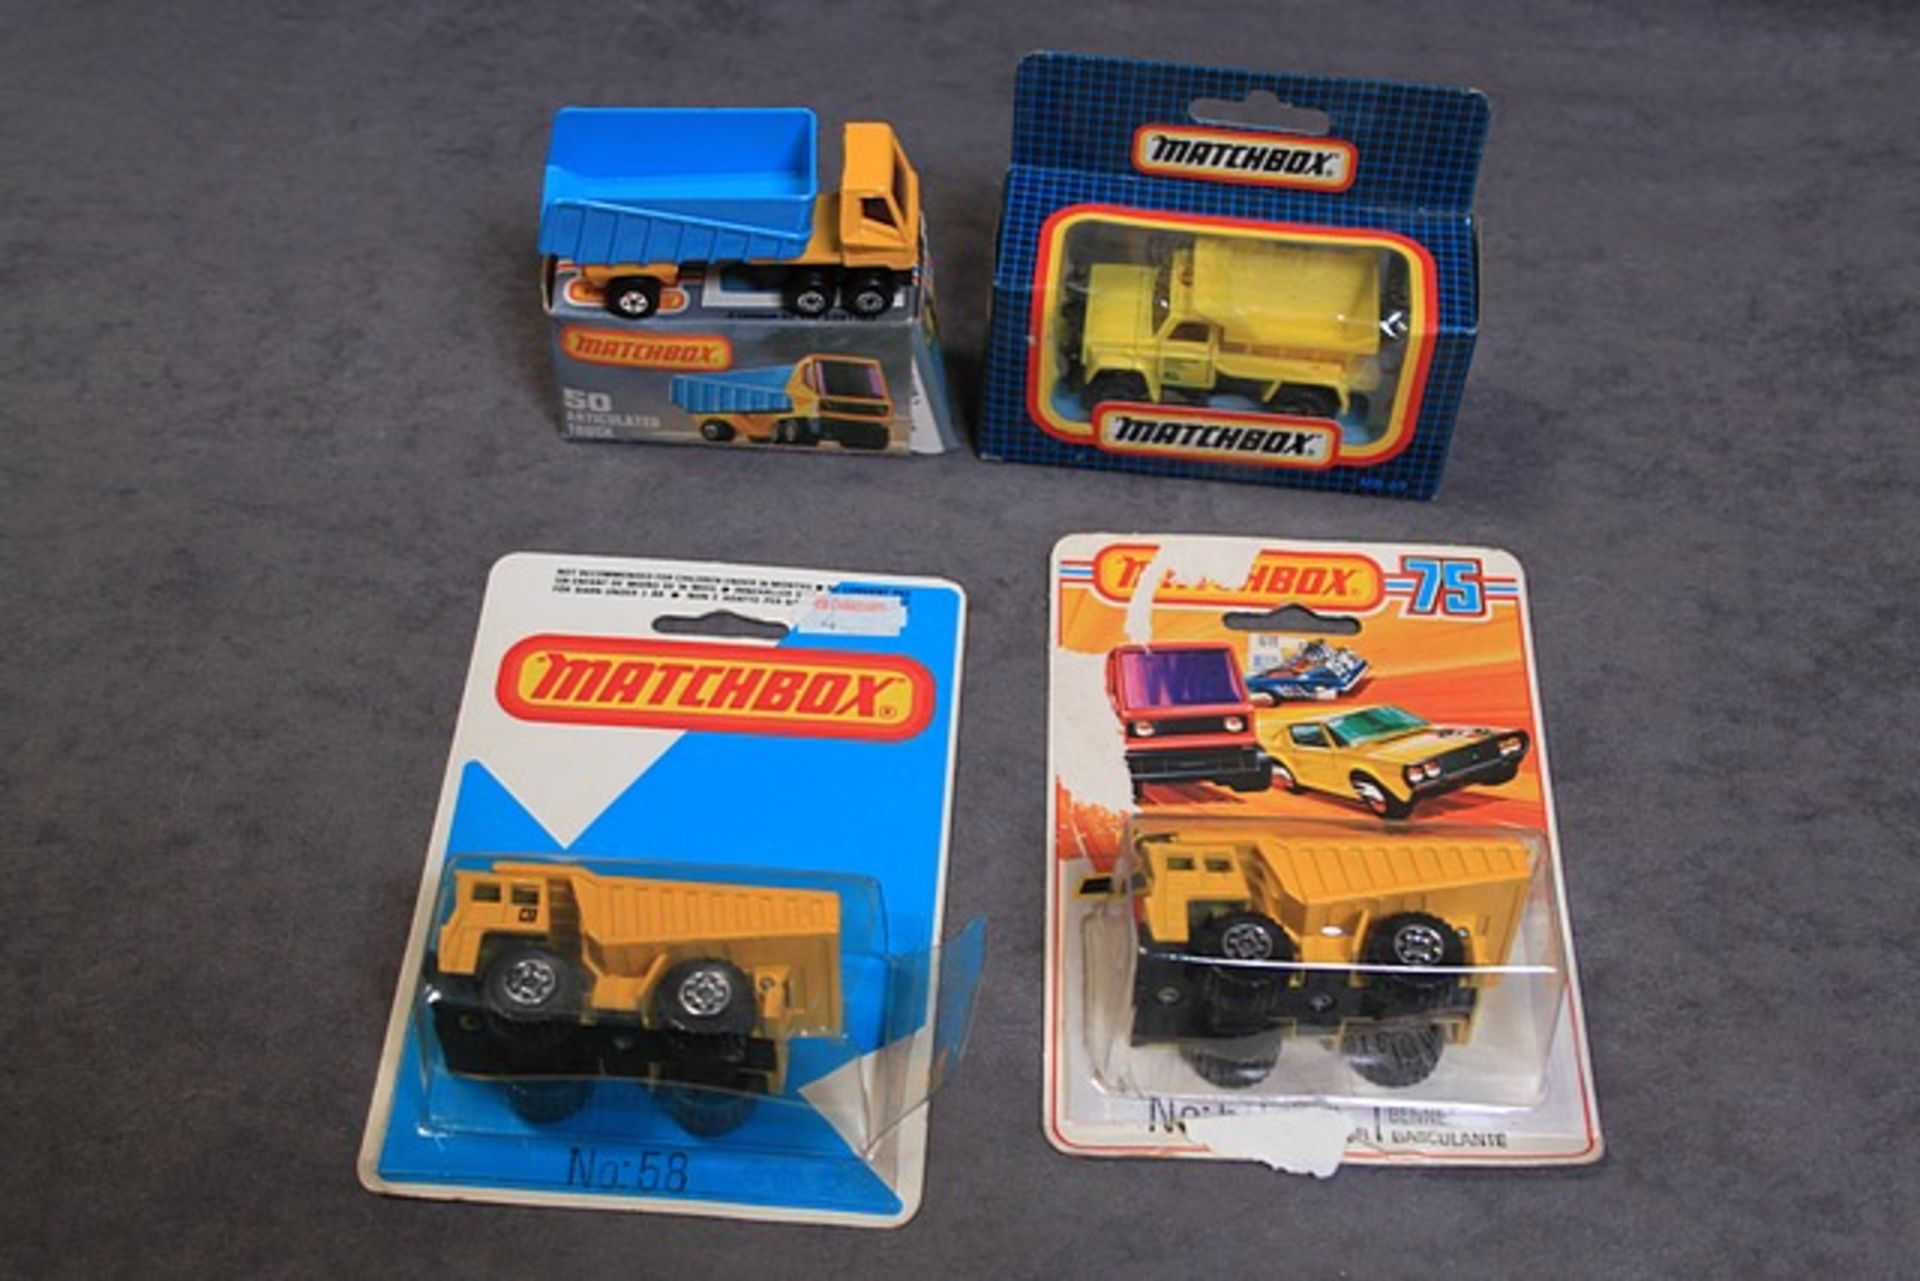 4 X Matchbox Diecast Models #50 Articulated Truck Mint In Excellent Box #MB69 Snow Plough Mint In - Image 2 of 2